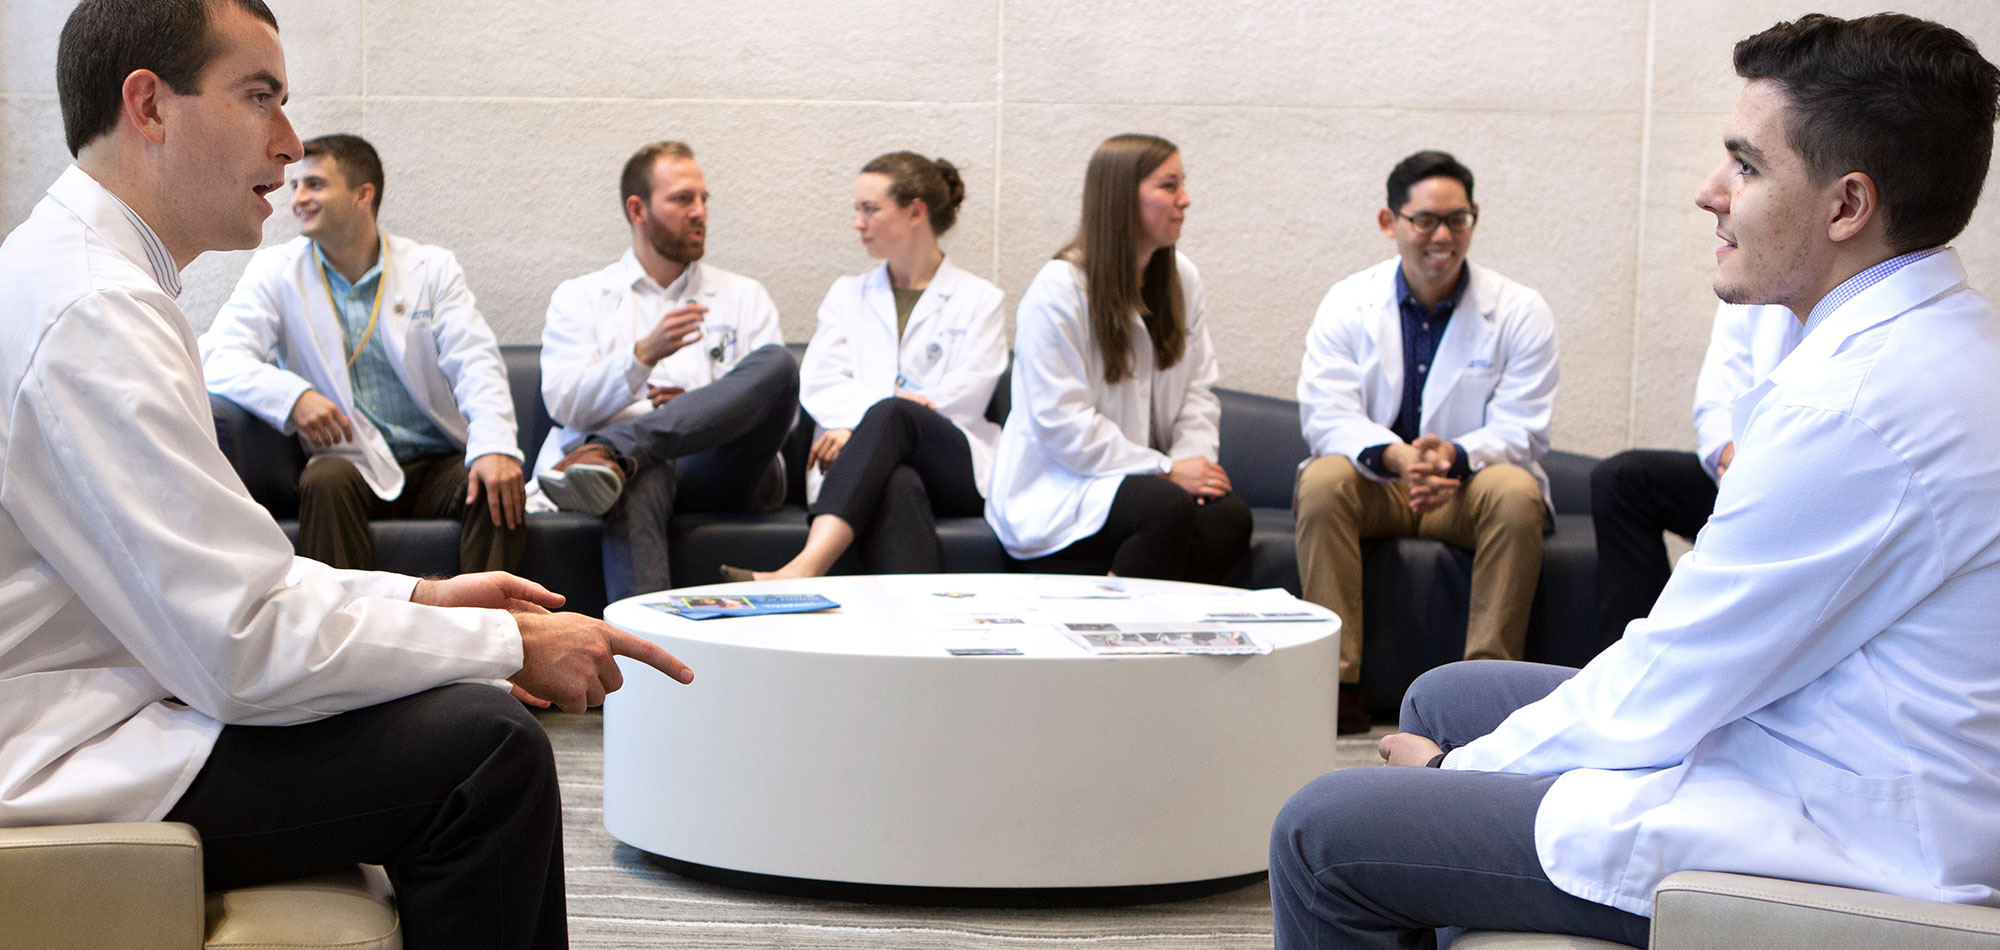 Students in the accelerated (3+) MD programs at Penn State College of Medicine are pictured in 2019 seated in the lobby of the college on modern-looking chairs. An oblong coffee table is in front of the students. Pictured are, from left, Seth Martin, FM-APPS; Frank Striale, FM-APPS; Dennis Madden, NS-APPS; Elizabeth Zimmerman, IM-APPS; Shannon Brumbaugh, FM-APPS; Alexander Lee, EM-APPS; and Abdel Mohamed, FM-APPS.